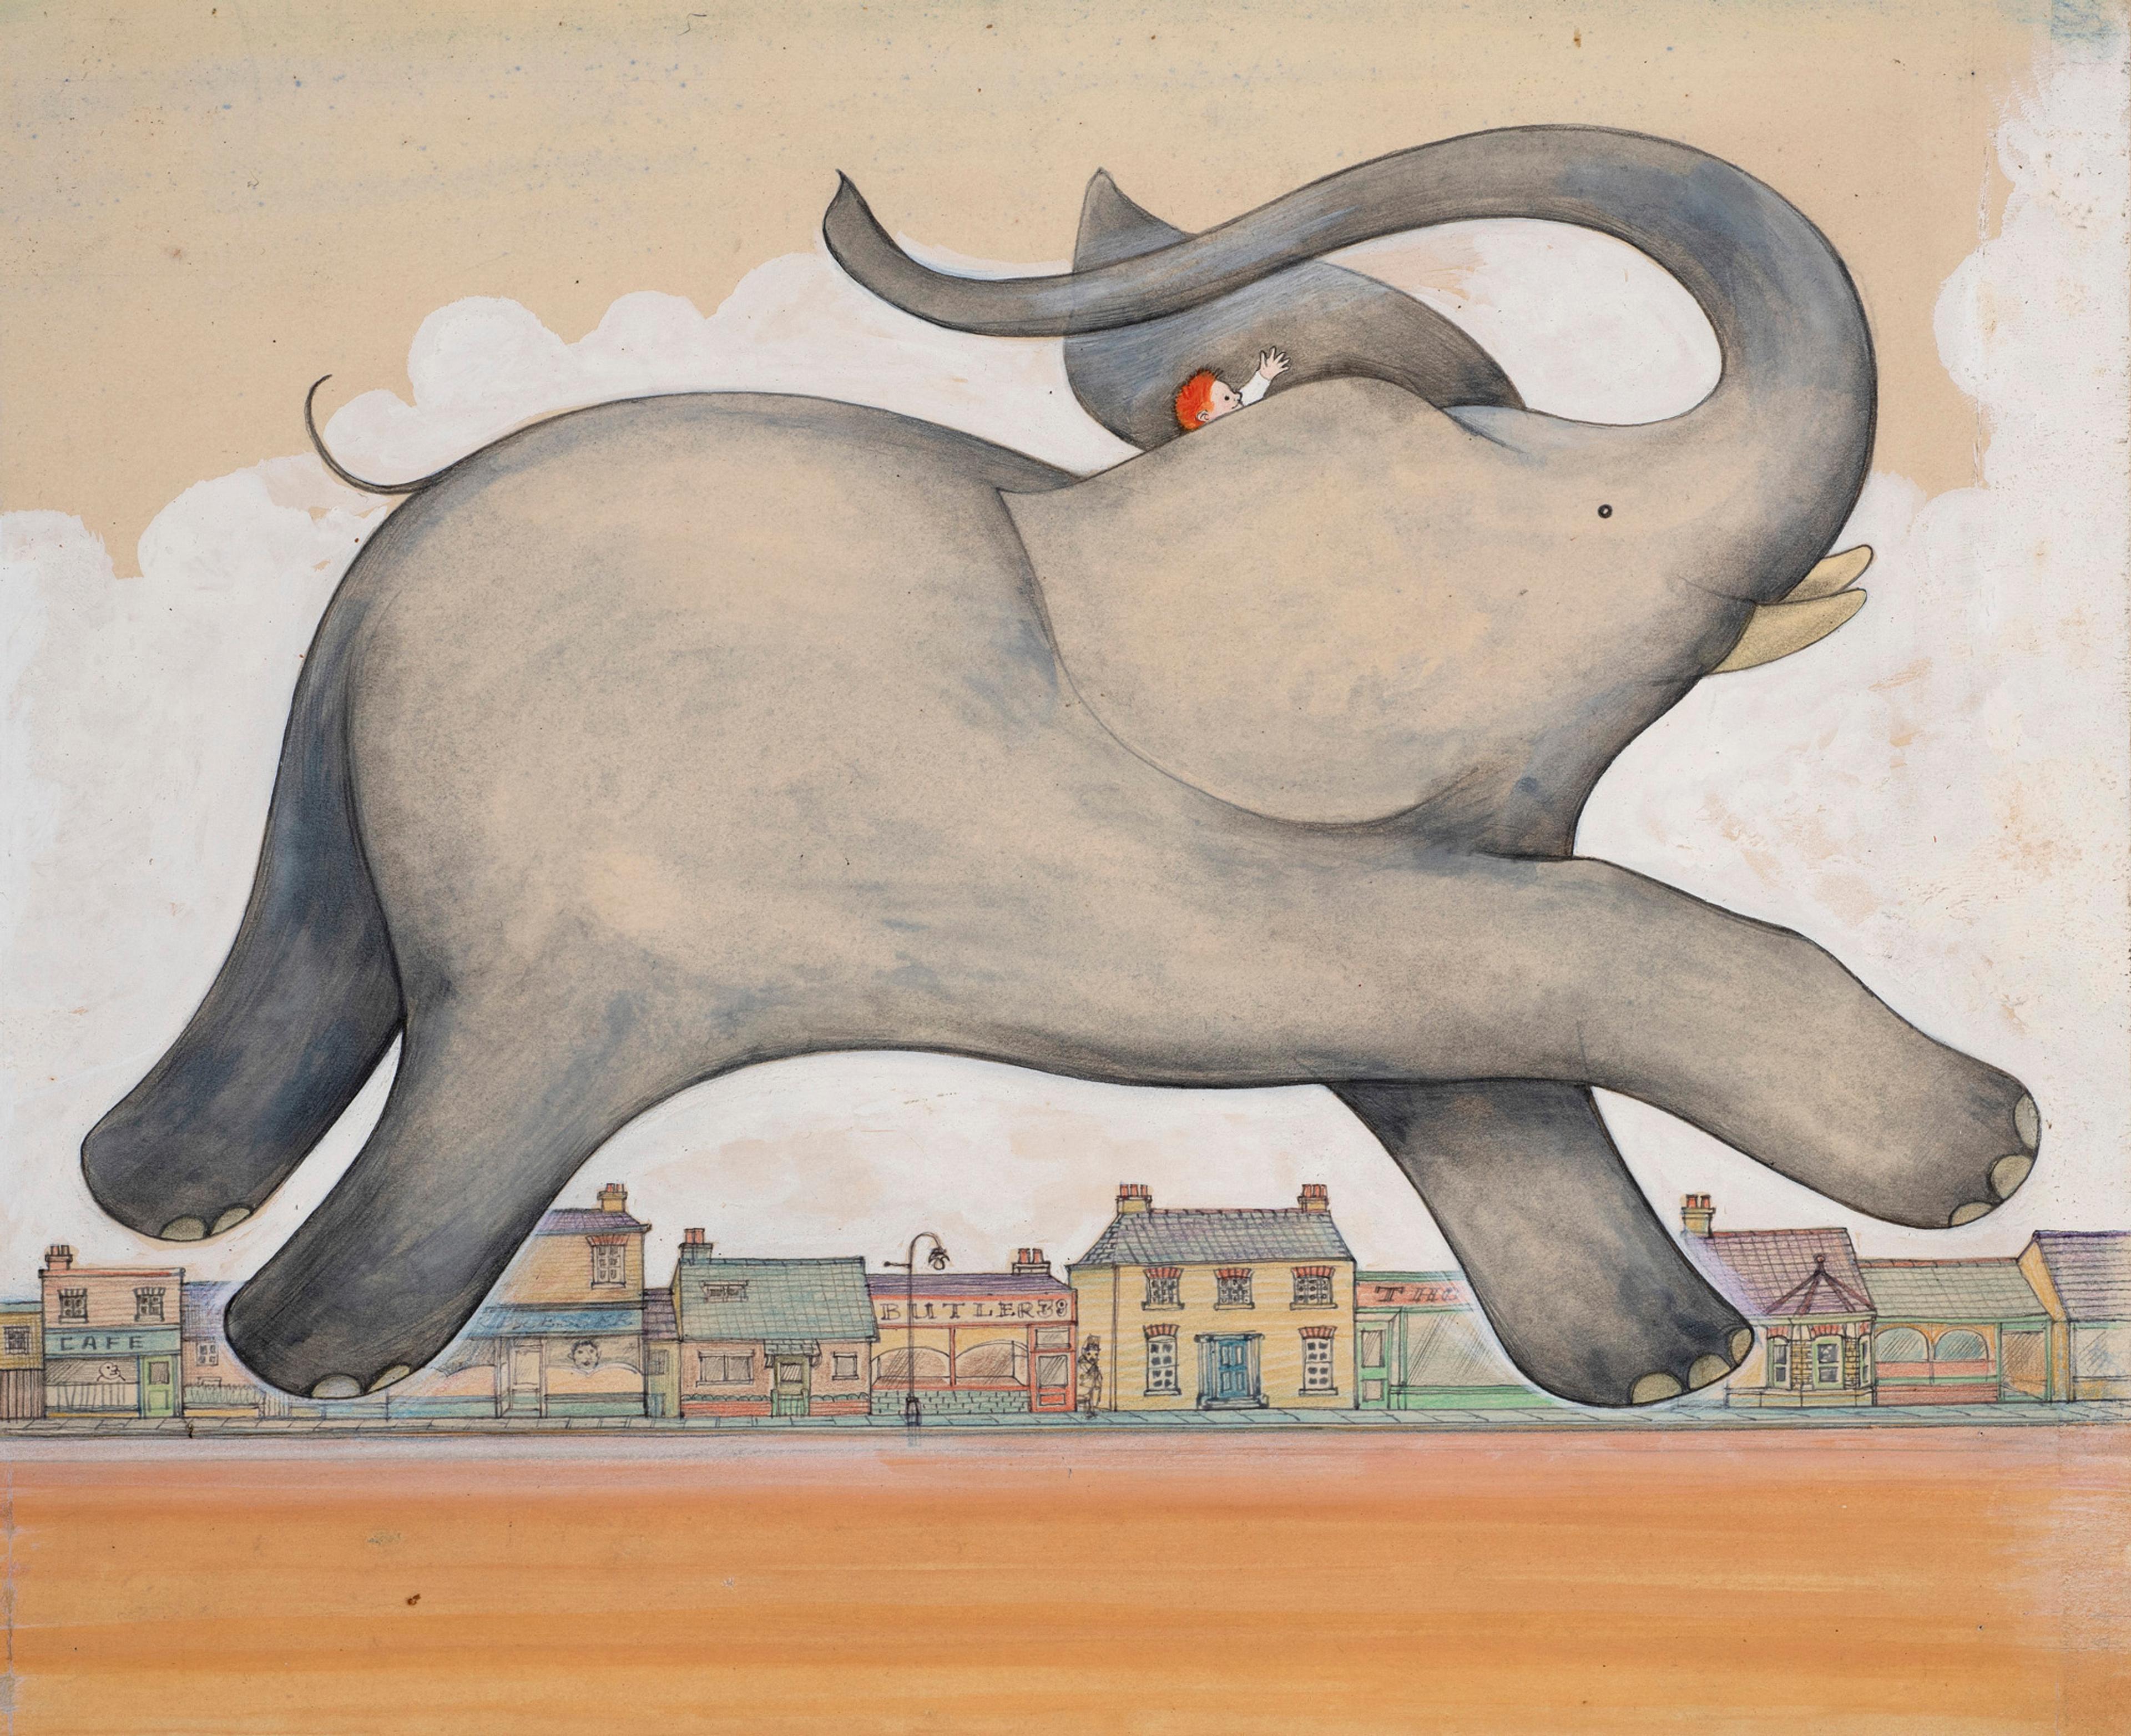 Illustration of an elephant with a child sitting on its head. There are buildings in the background.